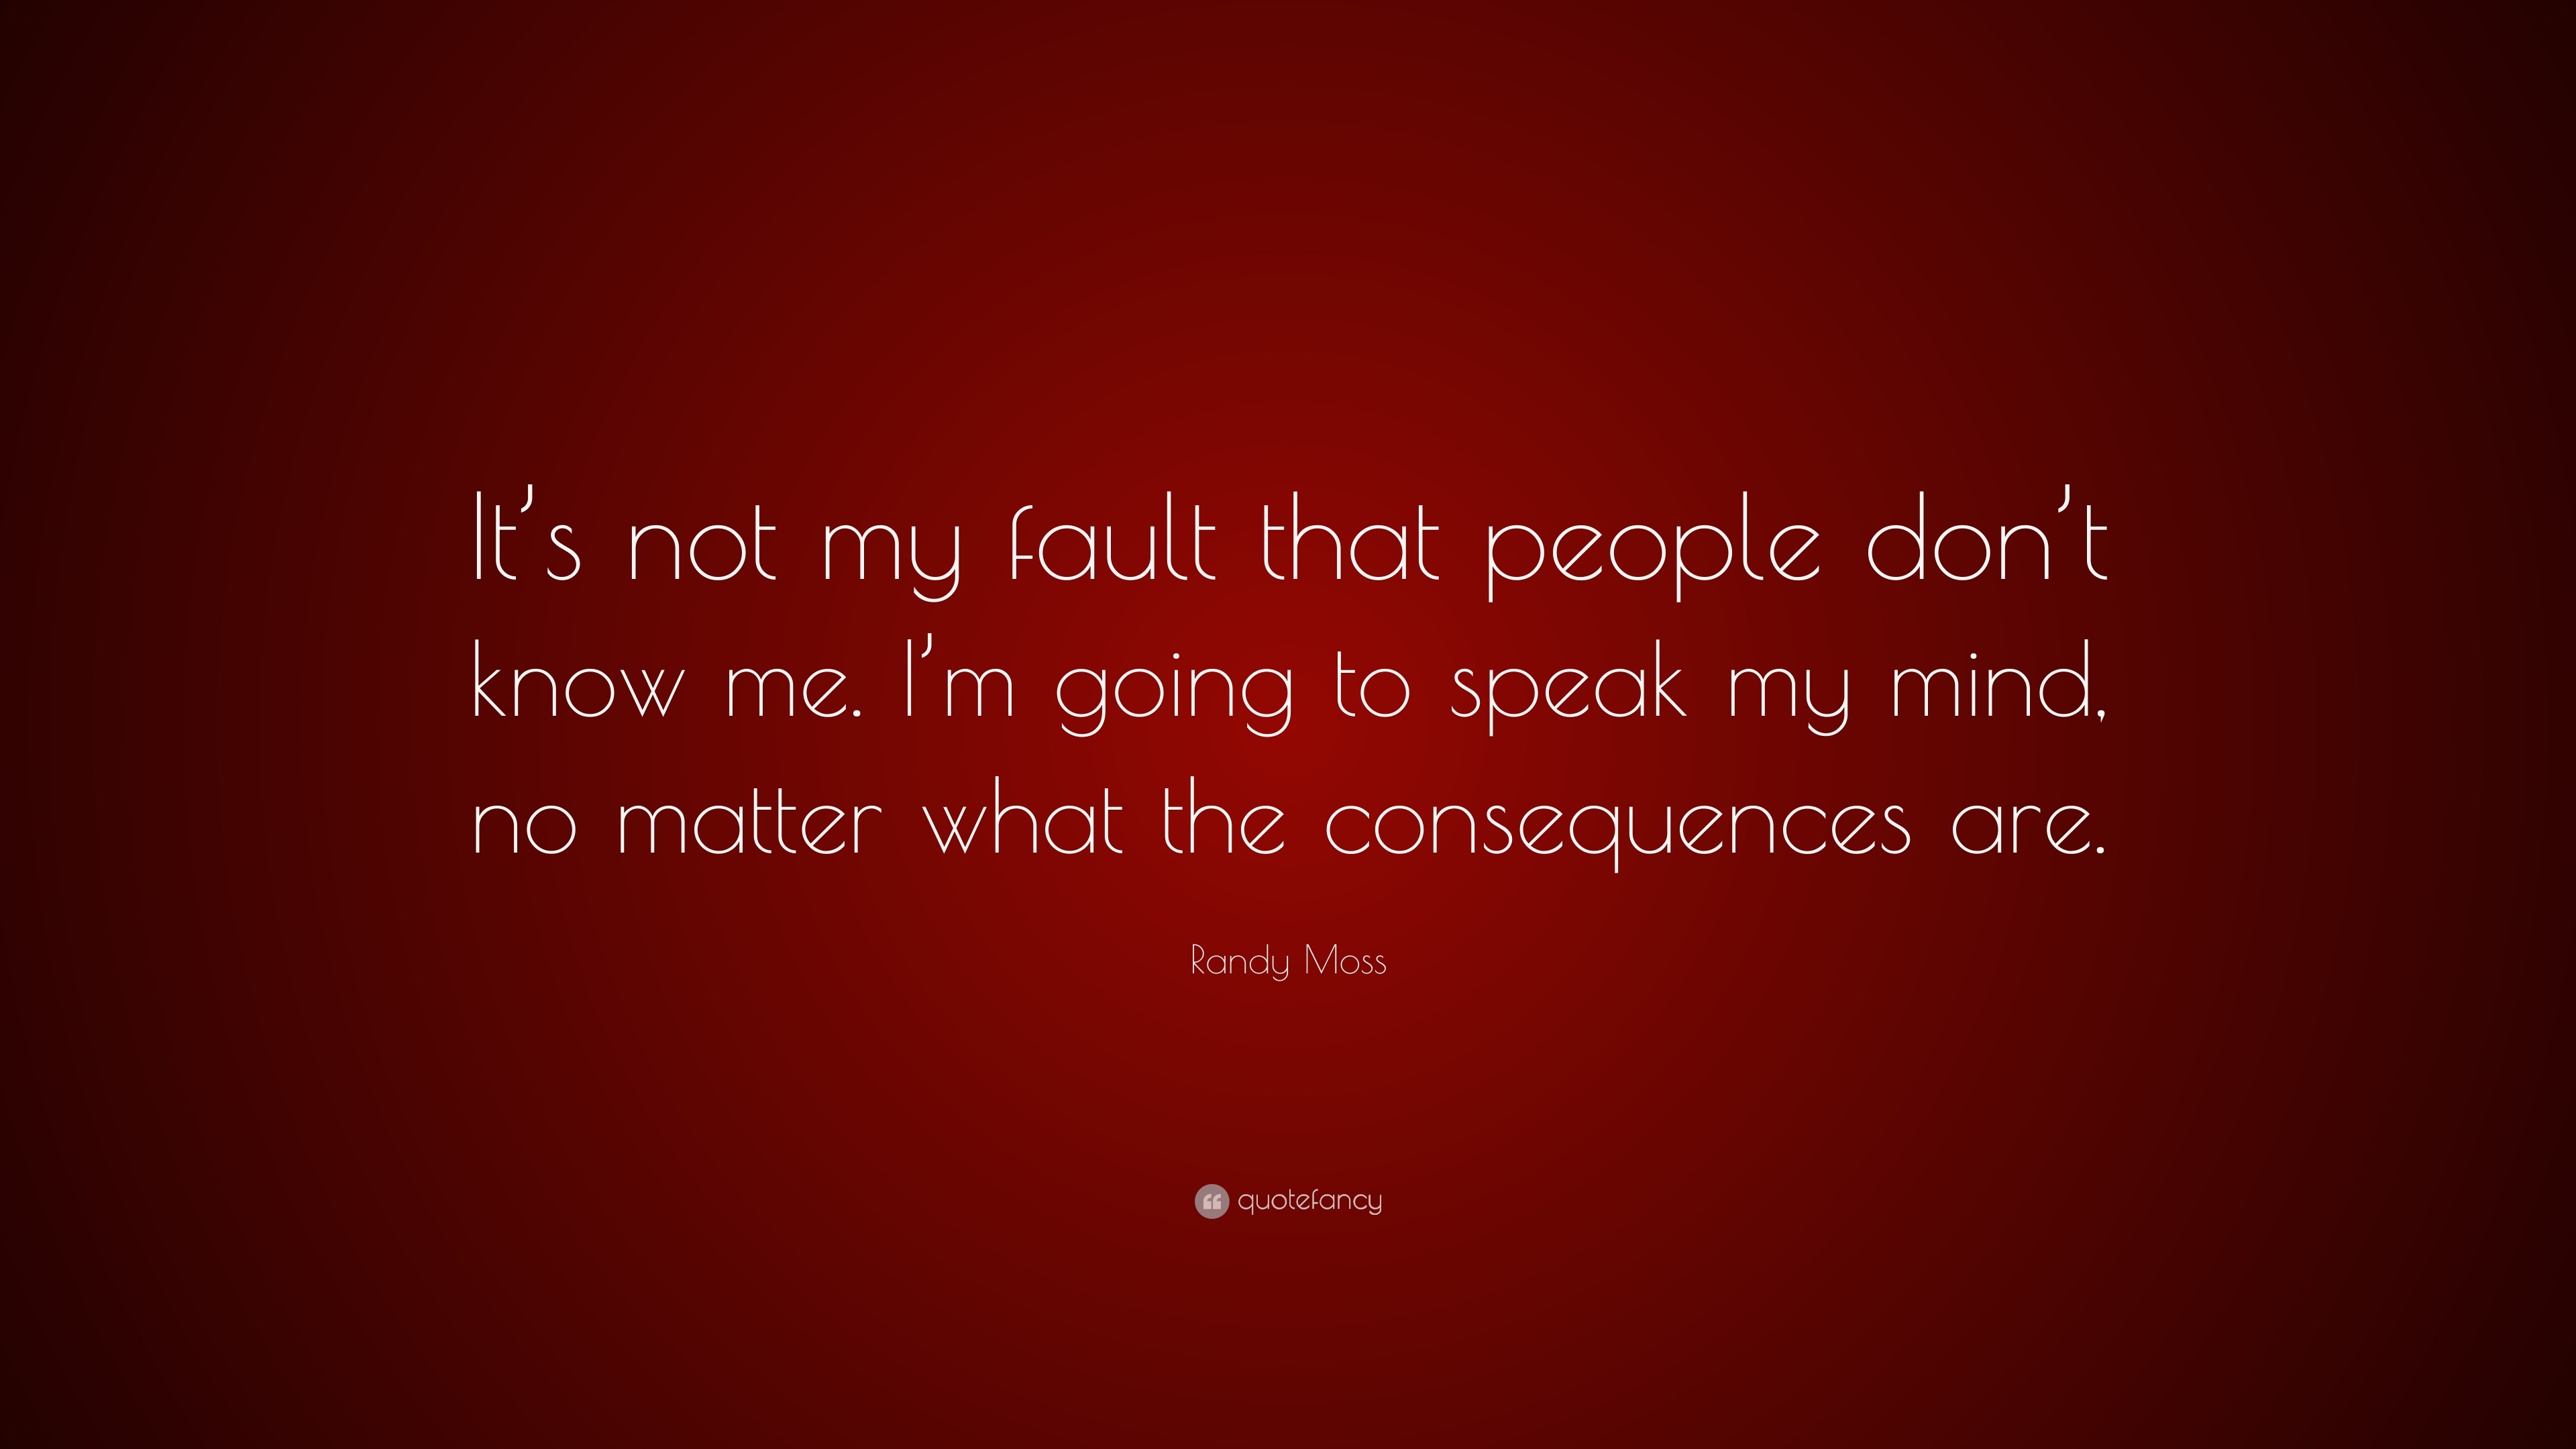 Randy Moss Quote: “It’s not my fault that people don’t know me. I’m ...